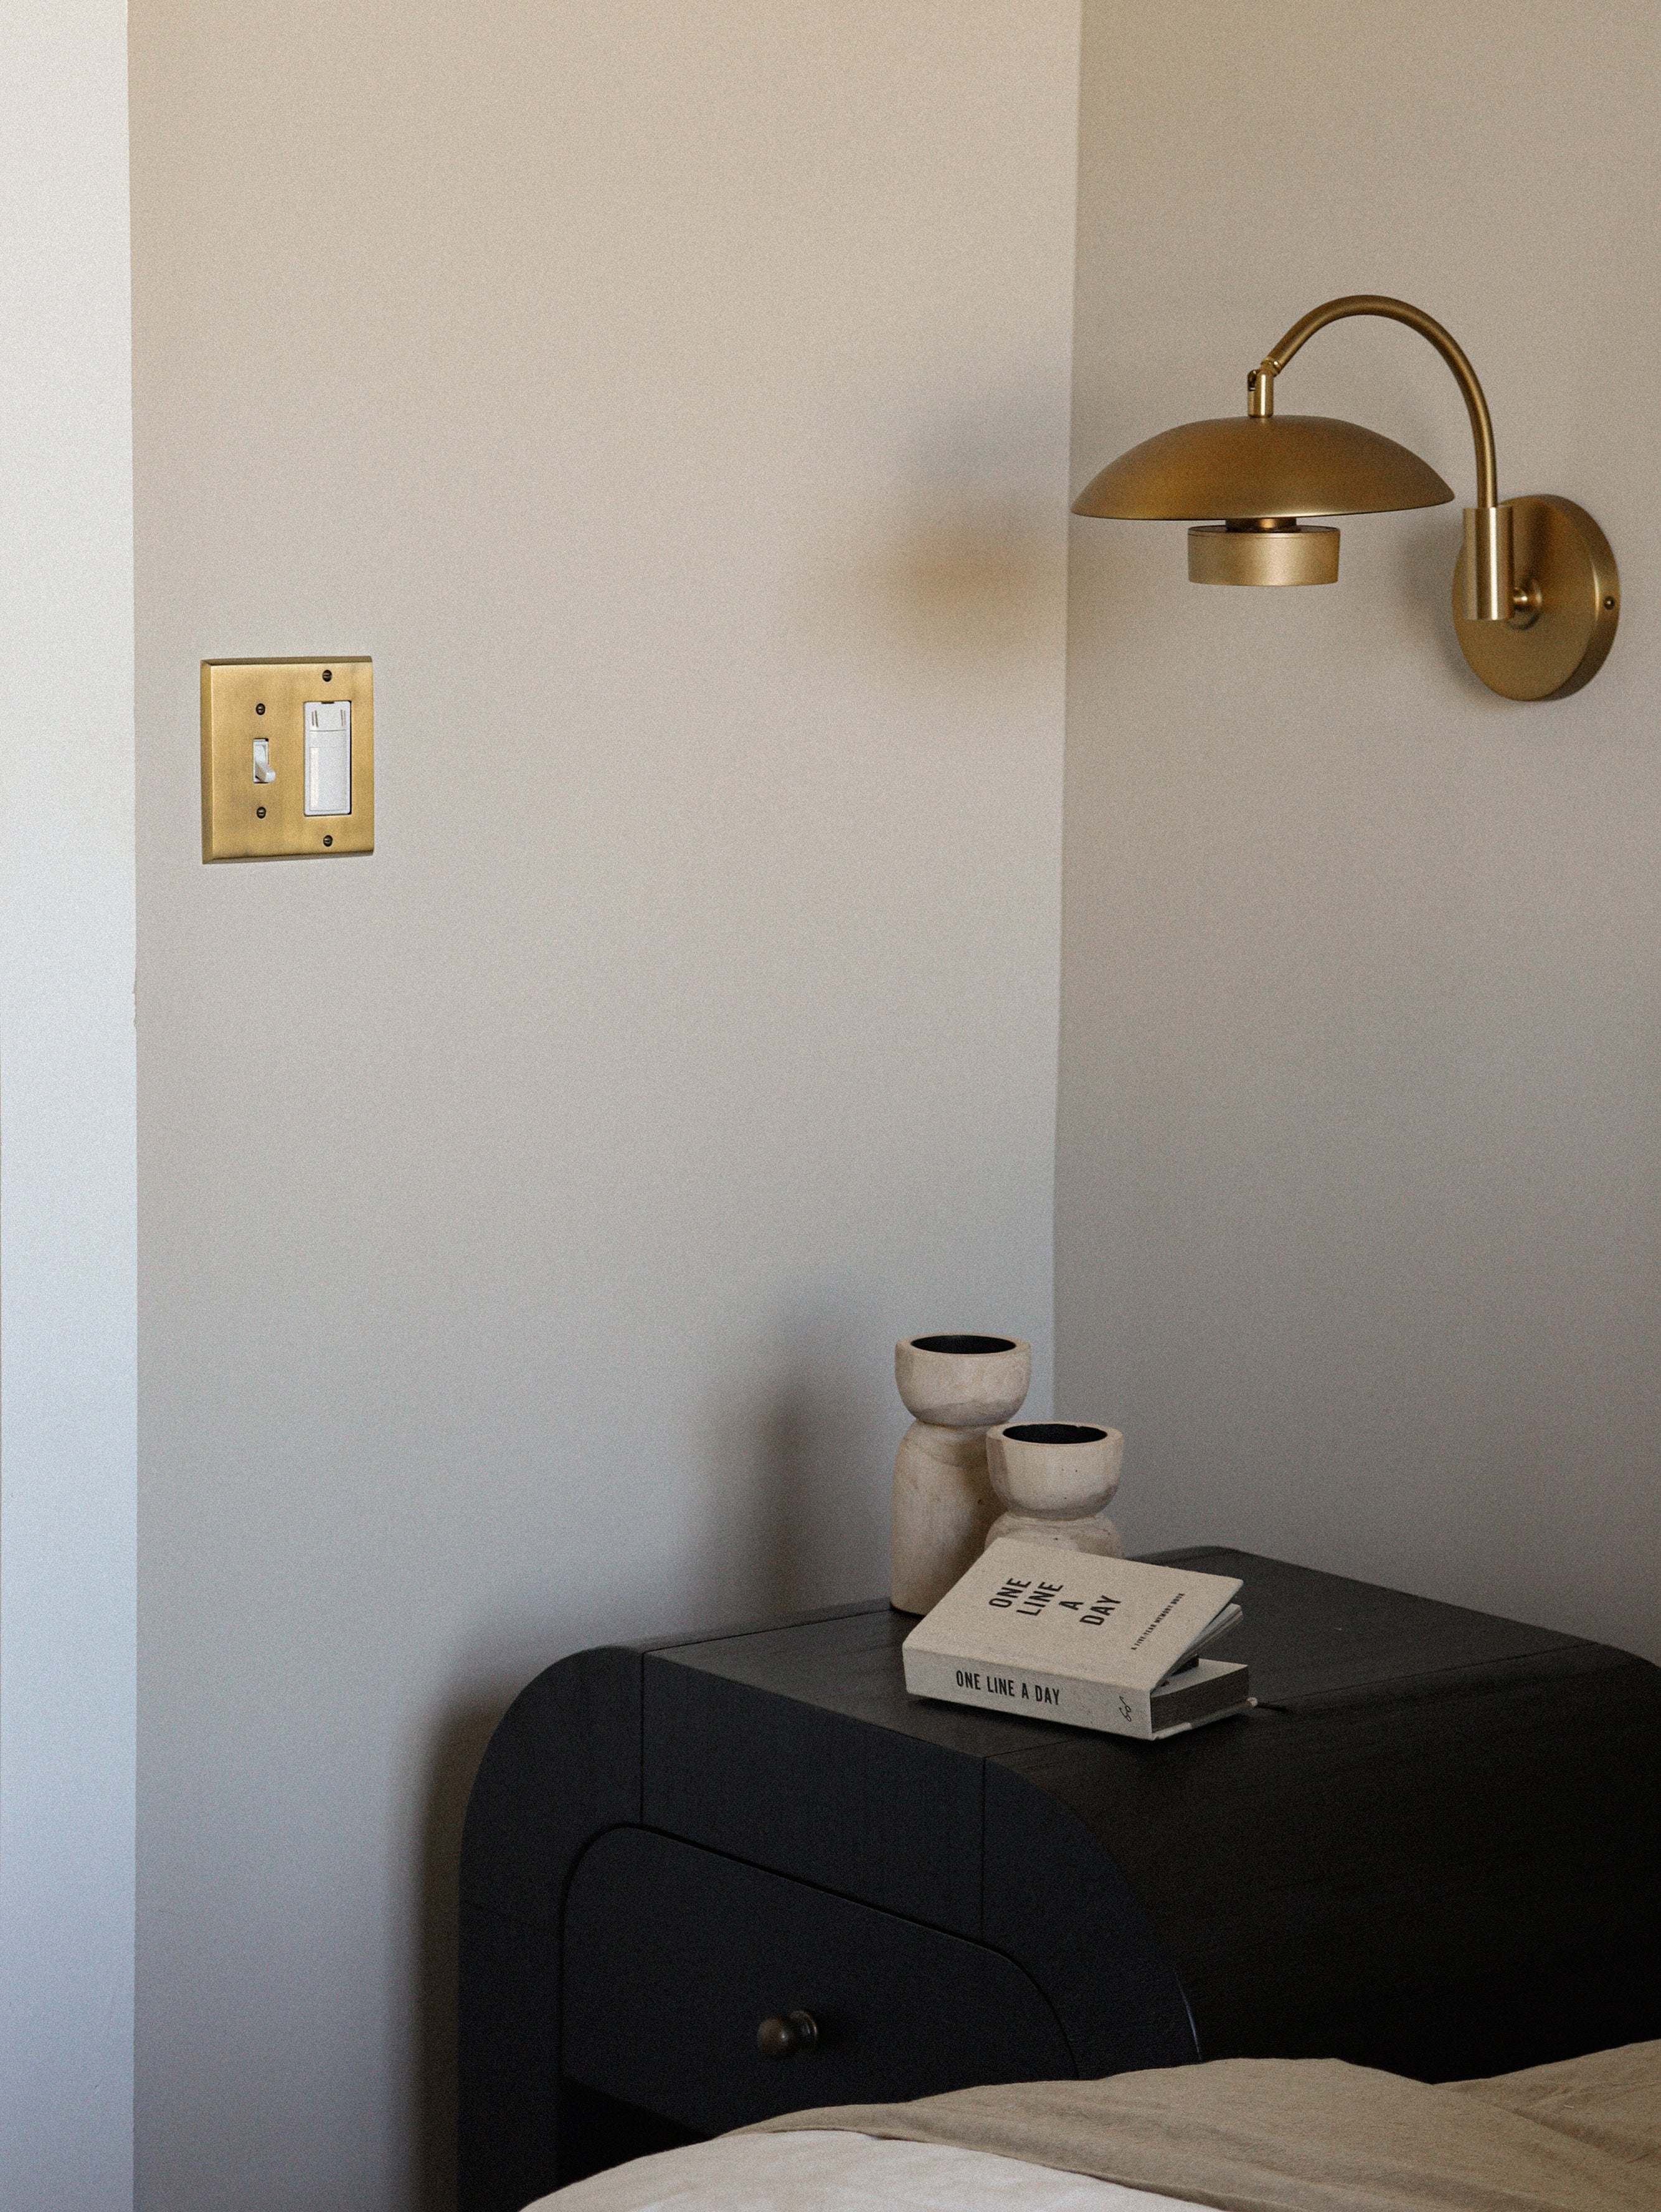 Bedside table in a corner with a lamp over it and a New York Switch Plate with Toggle and Rocker in Polished Brass on the other wall.